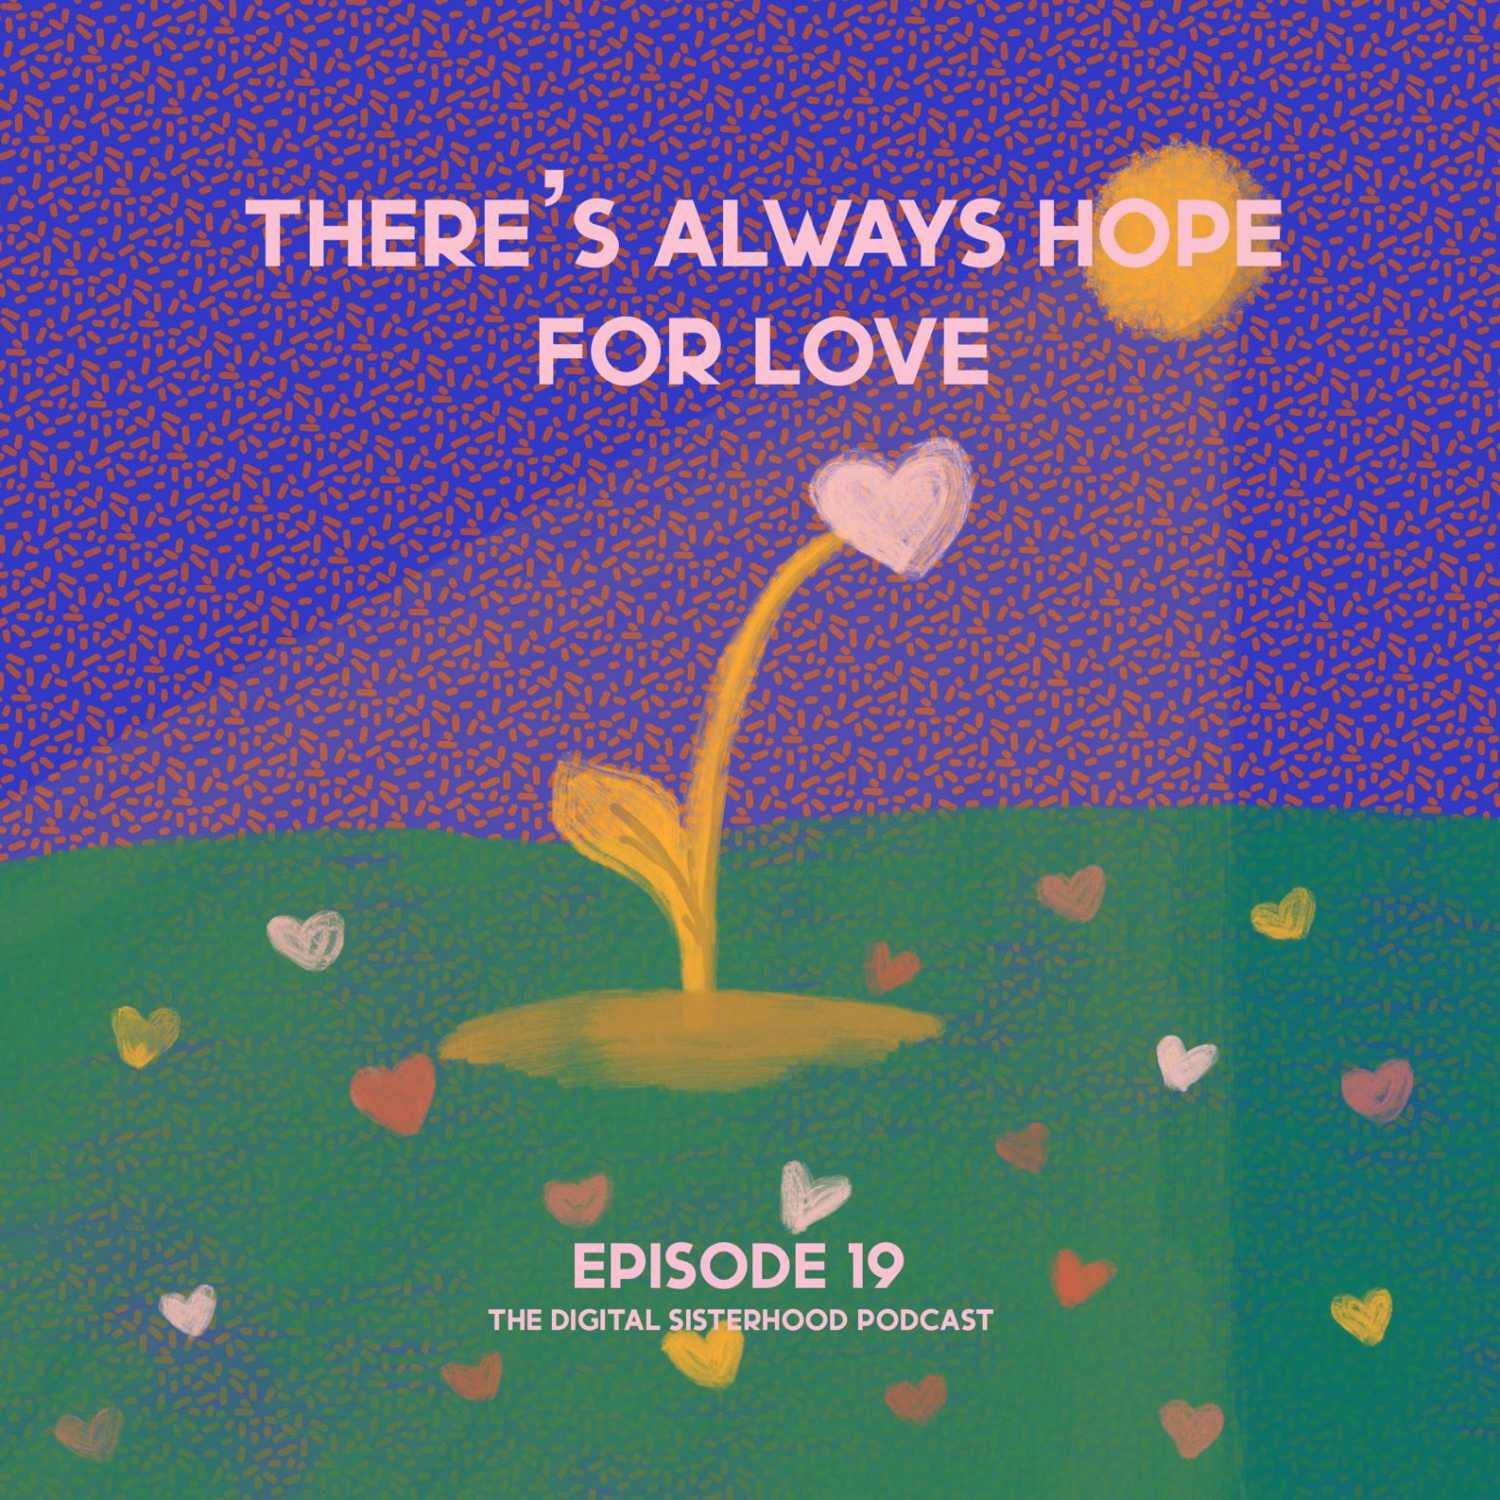 Episode Nineteen: There’s Always Hope For Love